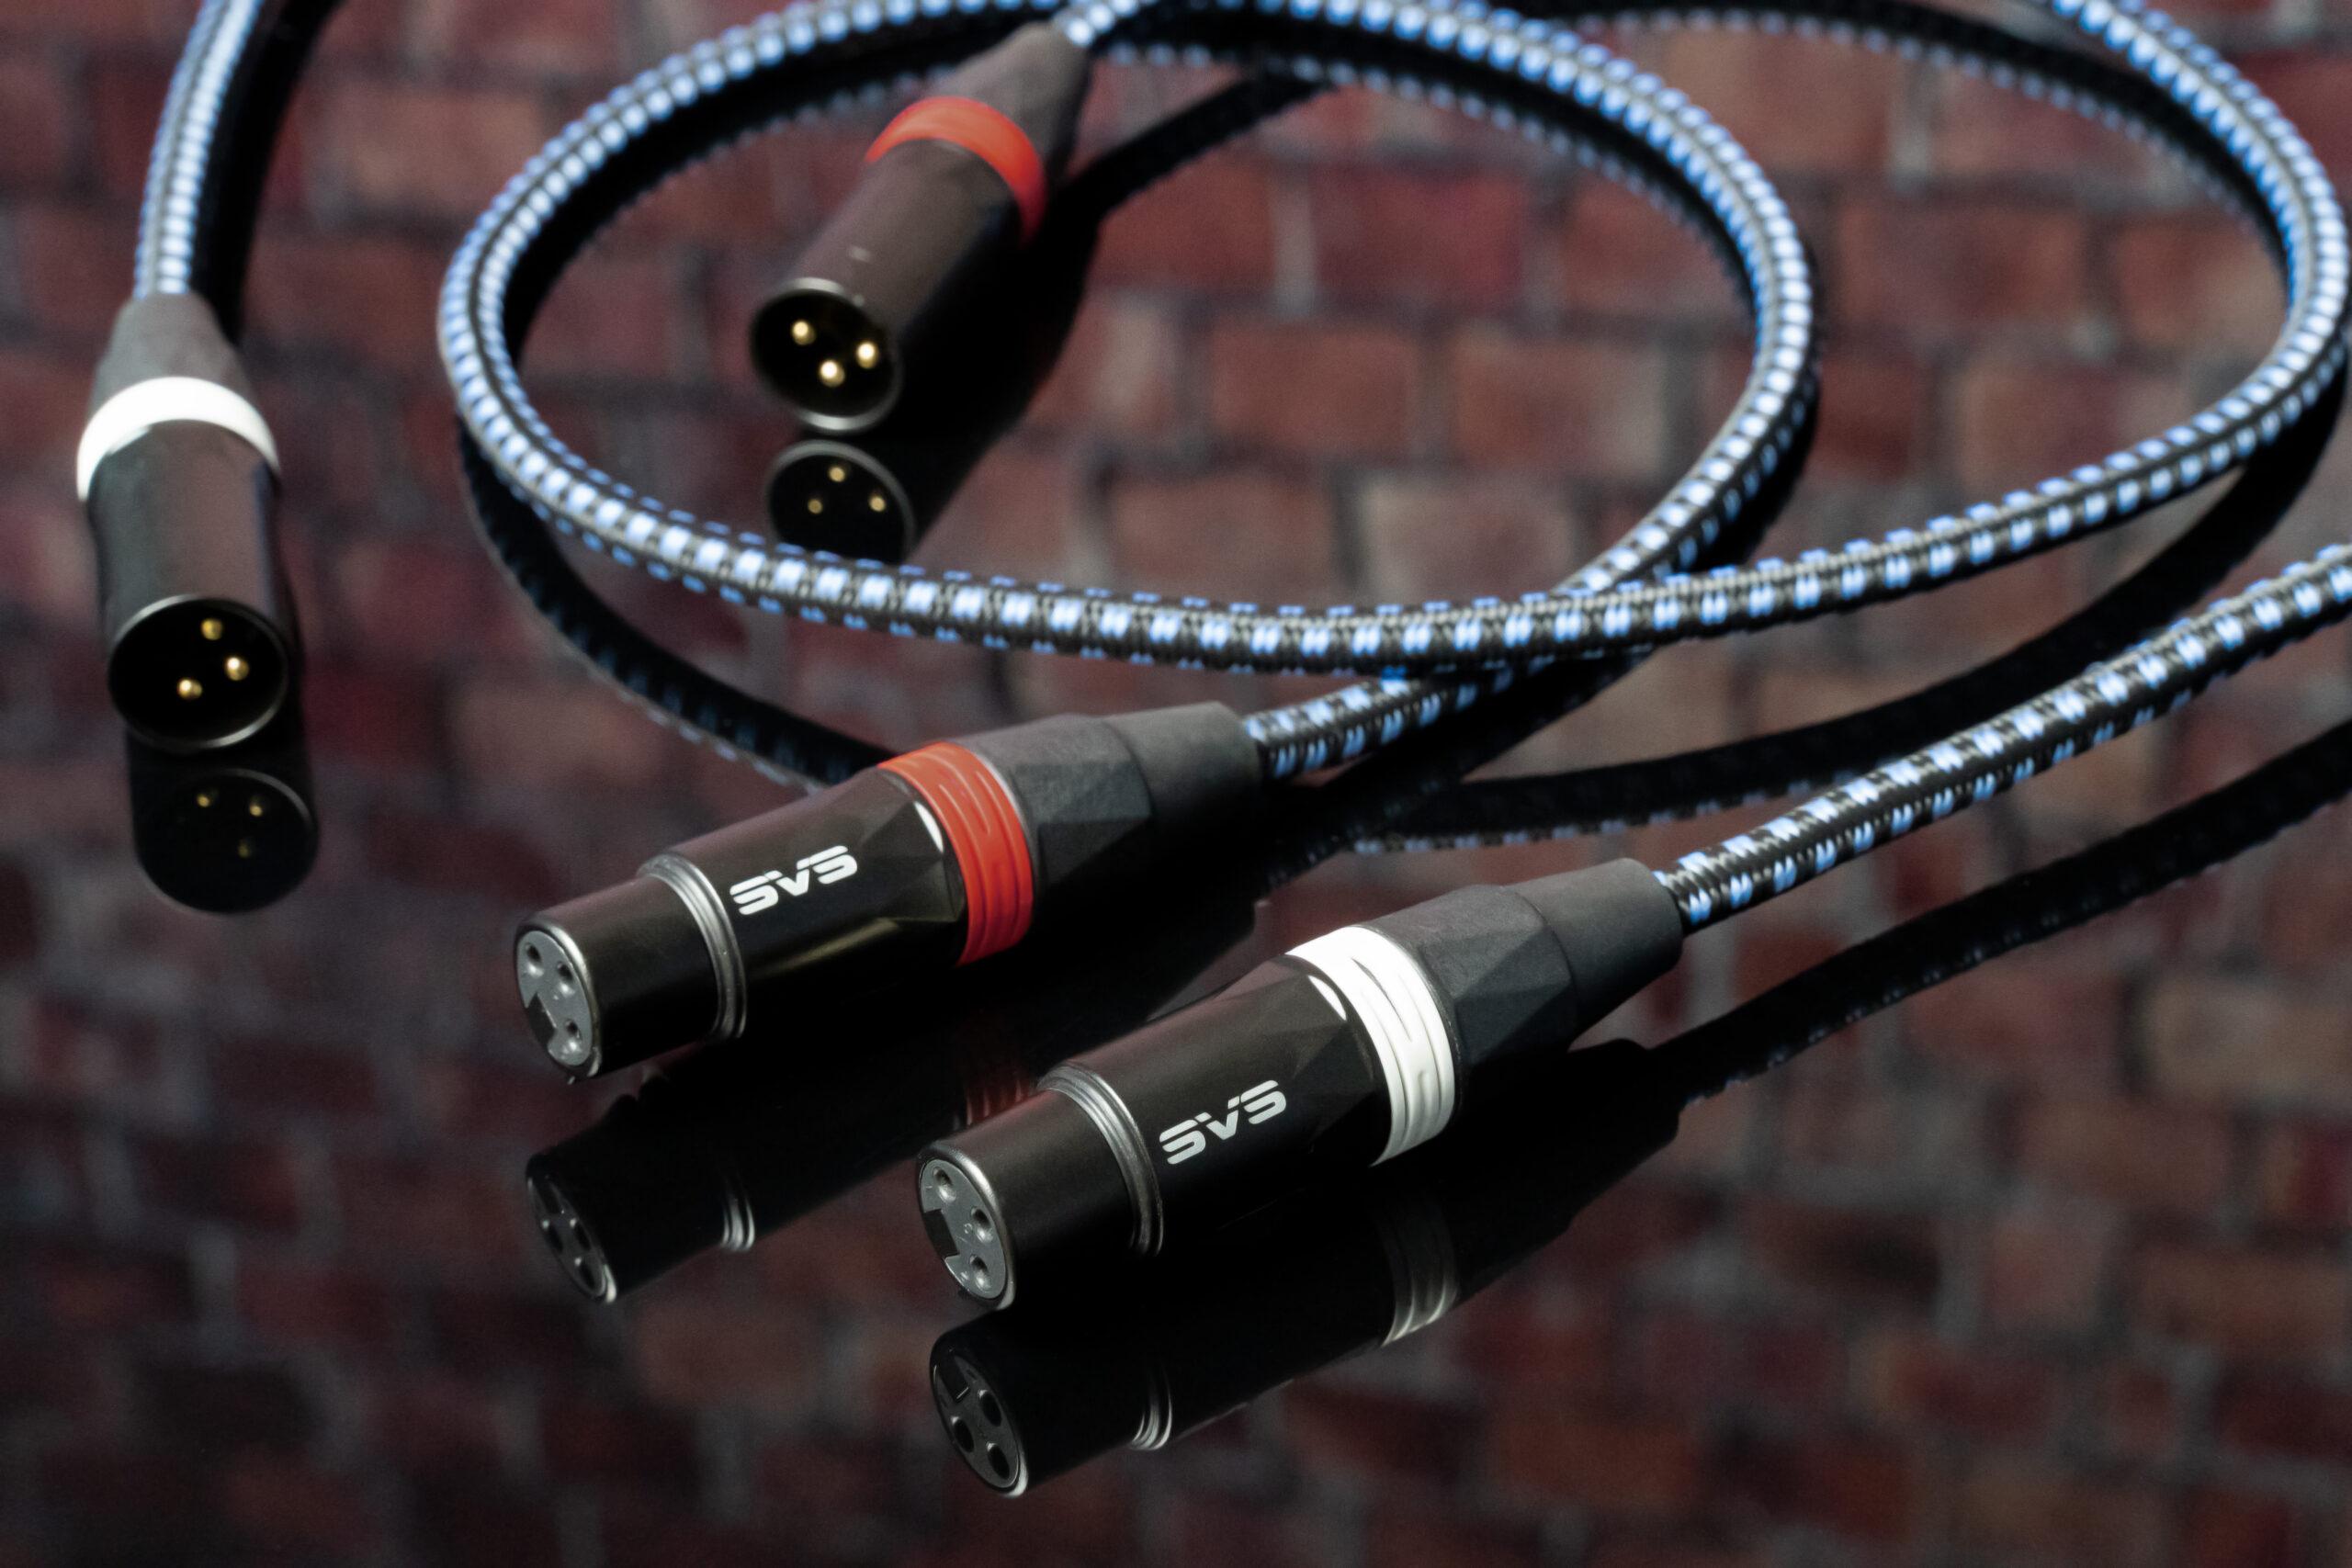 The future may be wireless, but cables are what get the job done for now. If you want some nice ones at a fair price, here are new options from SVS 4912e108 soundpath xlr pair glam 2 scaled